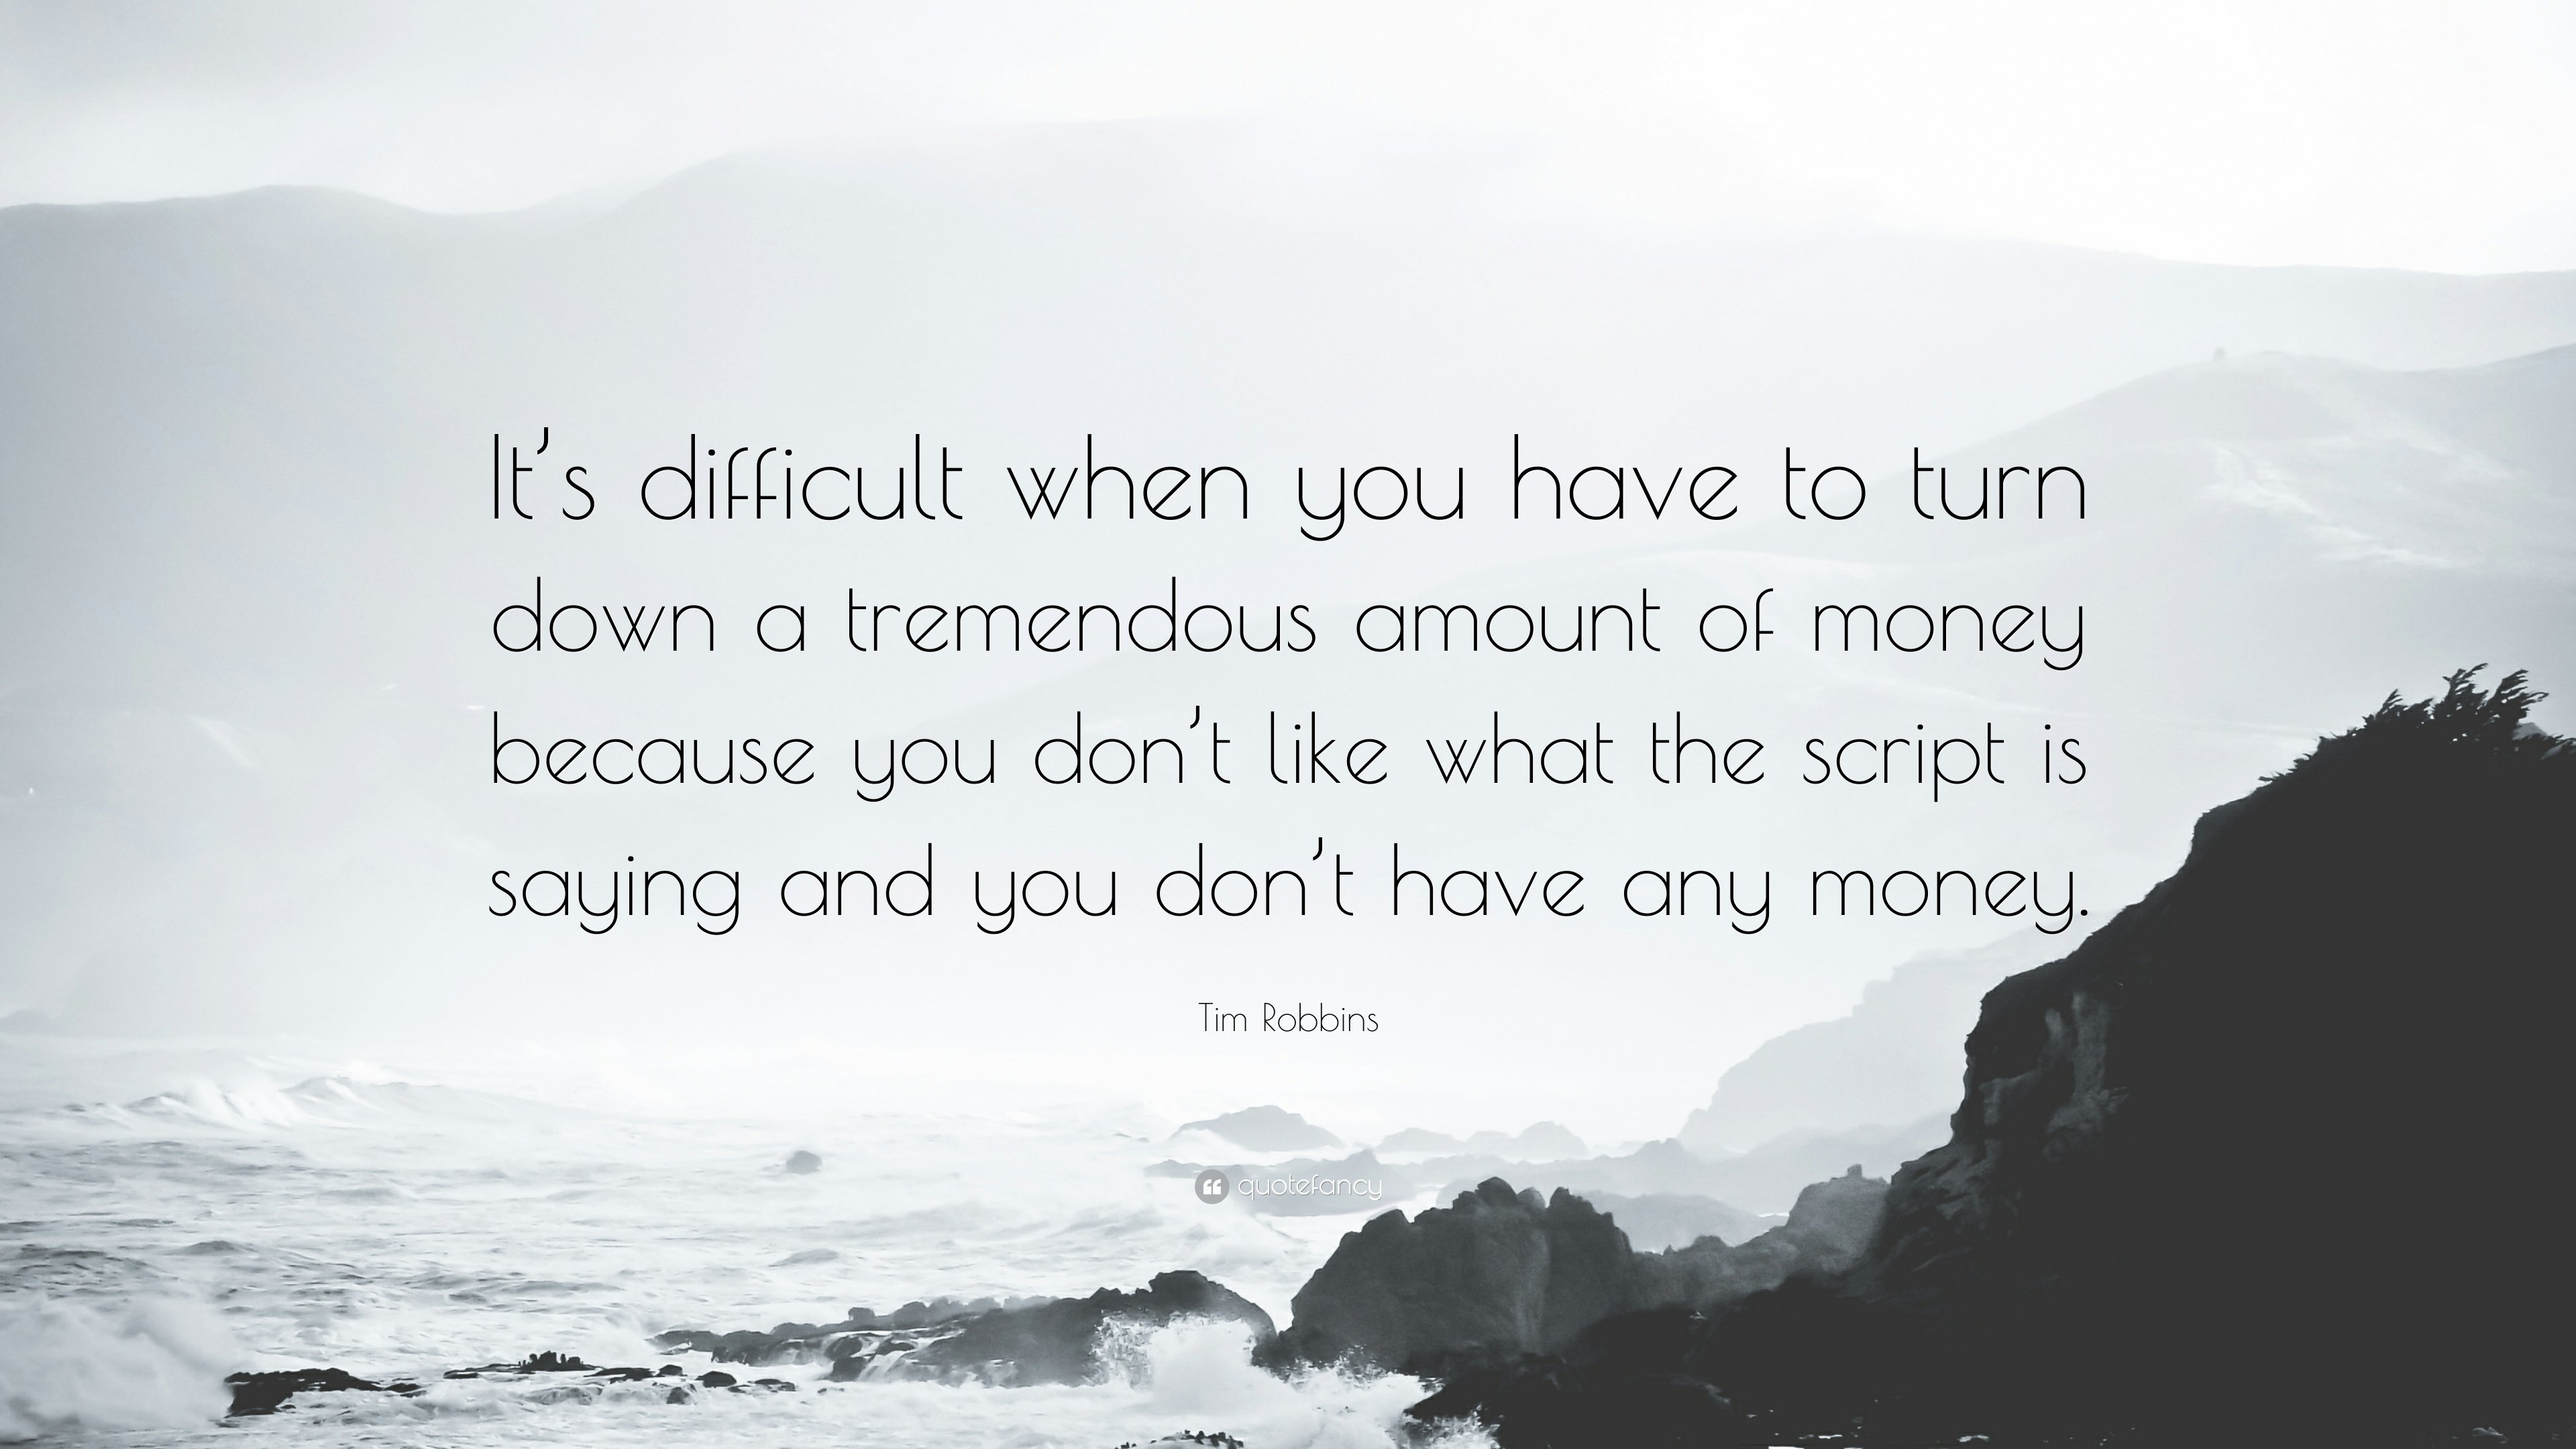 Tim Robbins Quote: “It's difficult when you have to turn